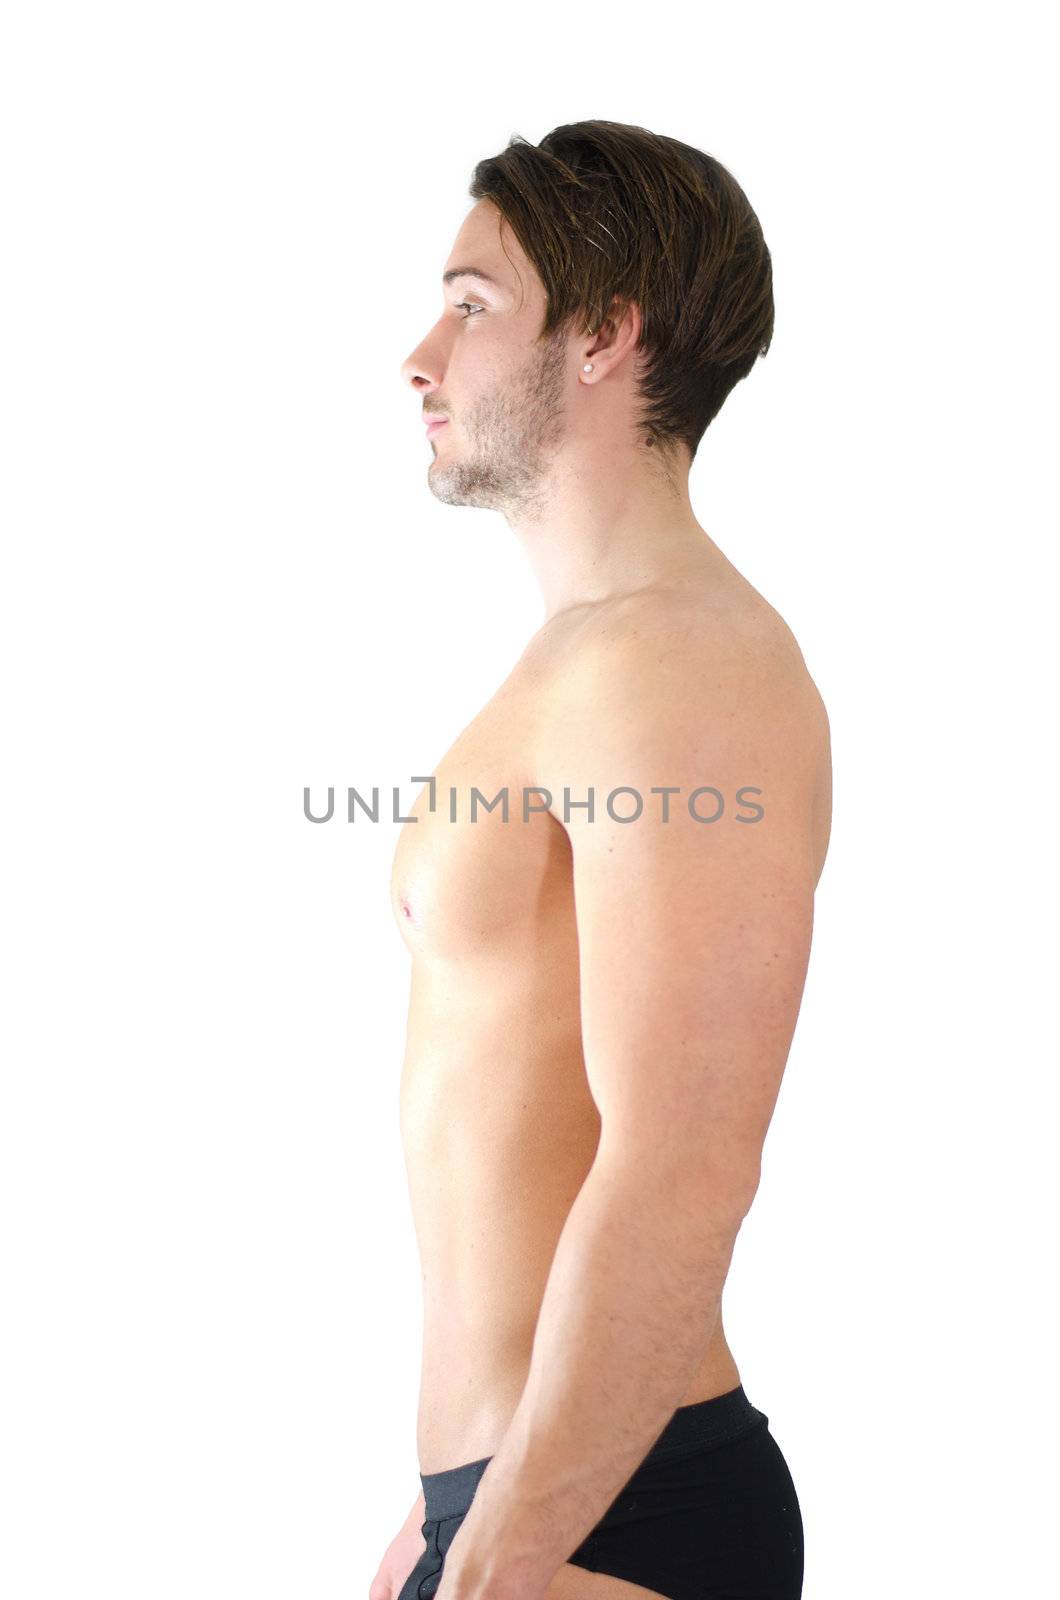 Side or profile view of shirtless young man standing with proper posture or position